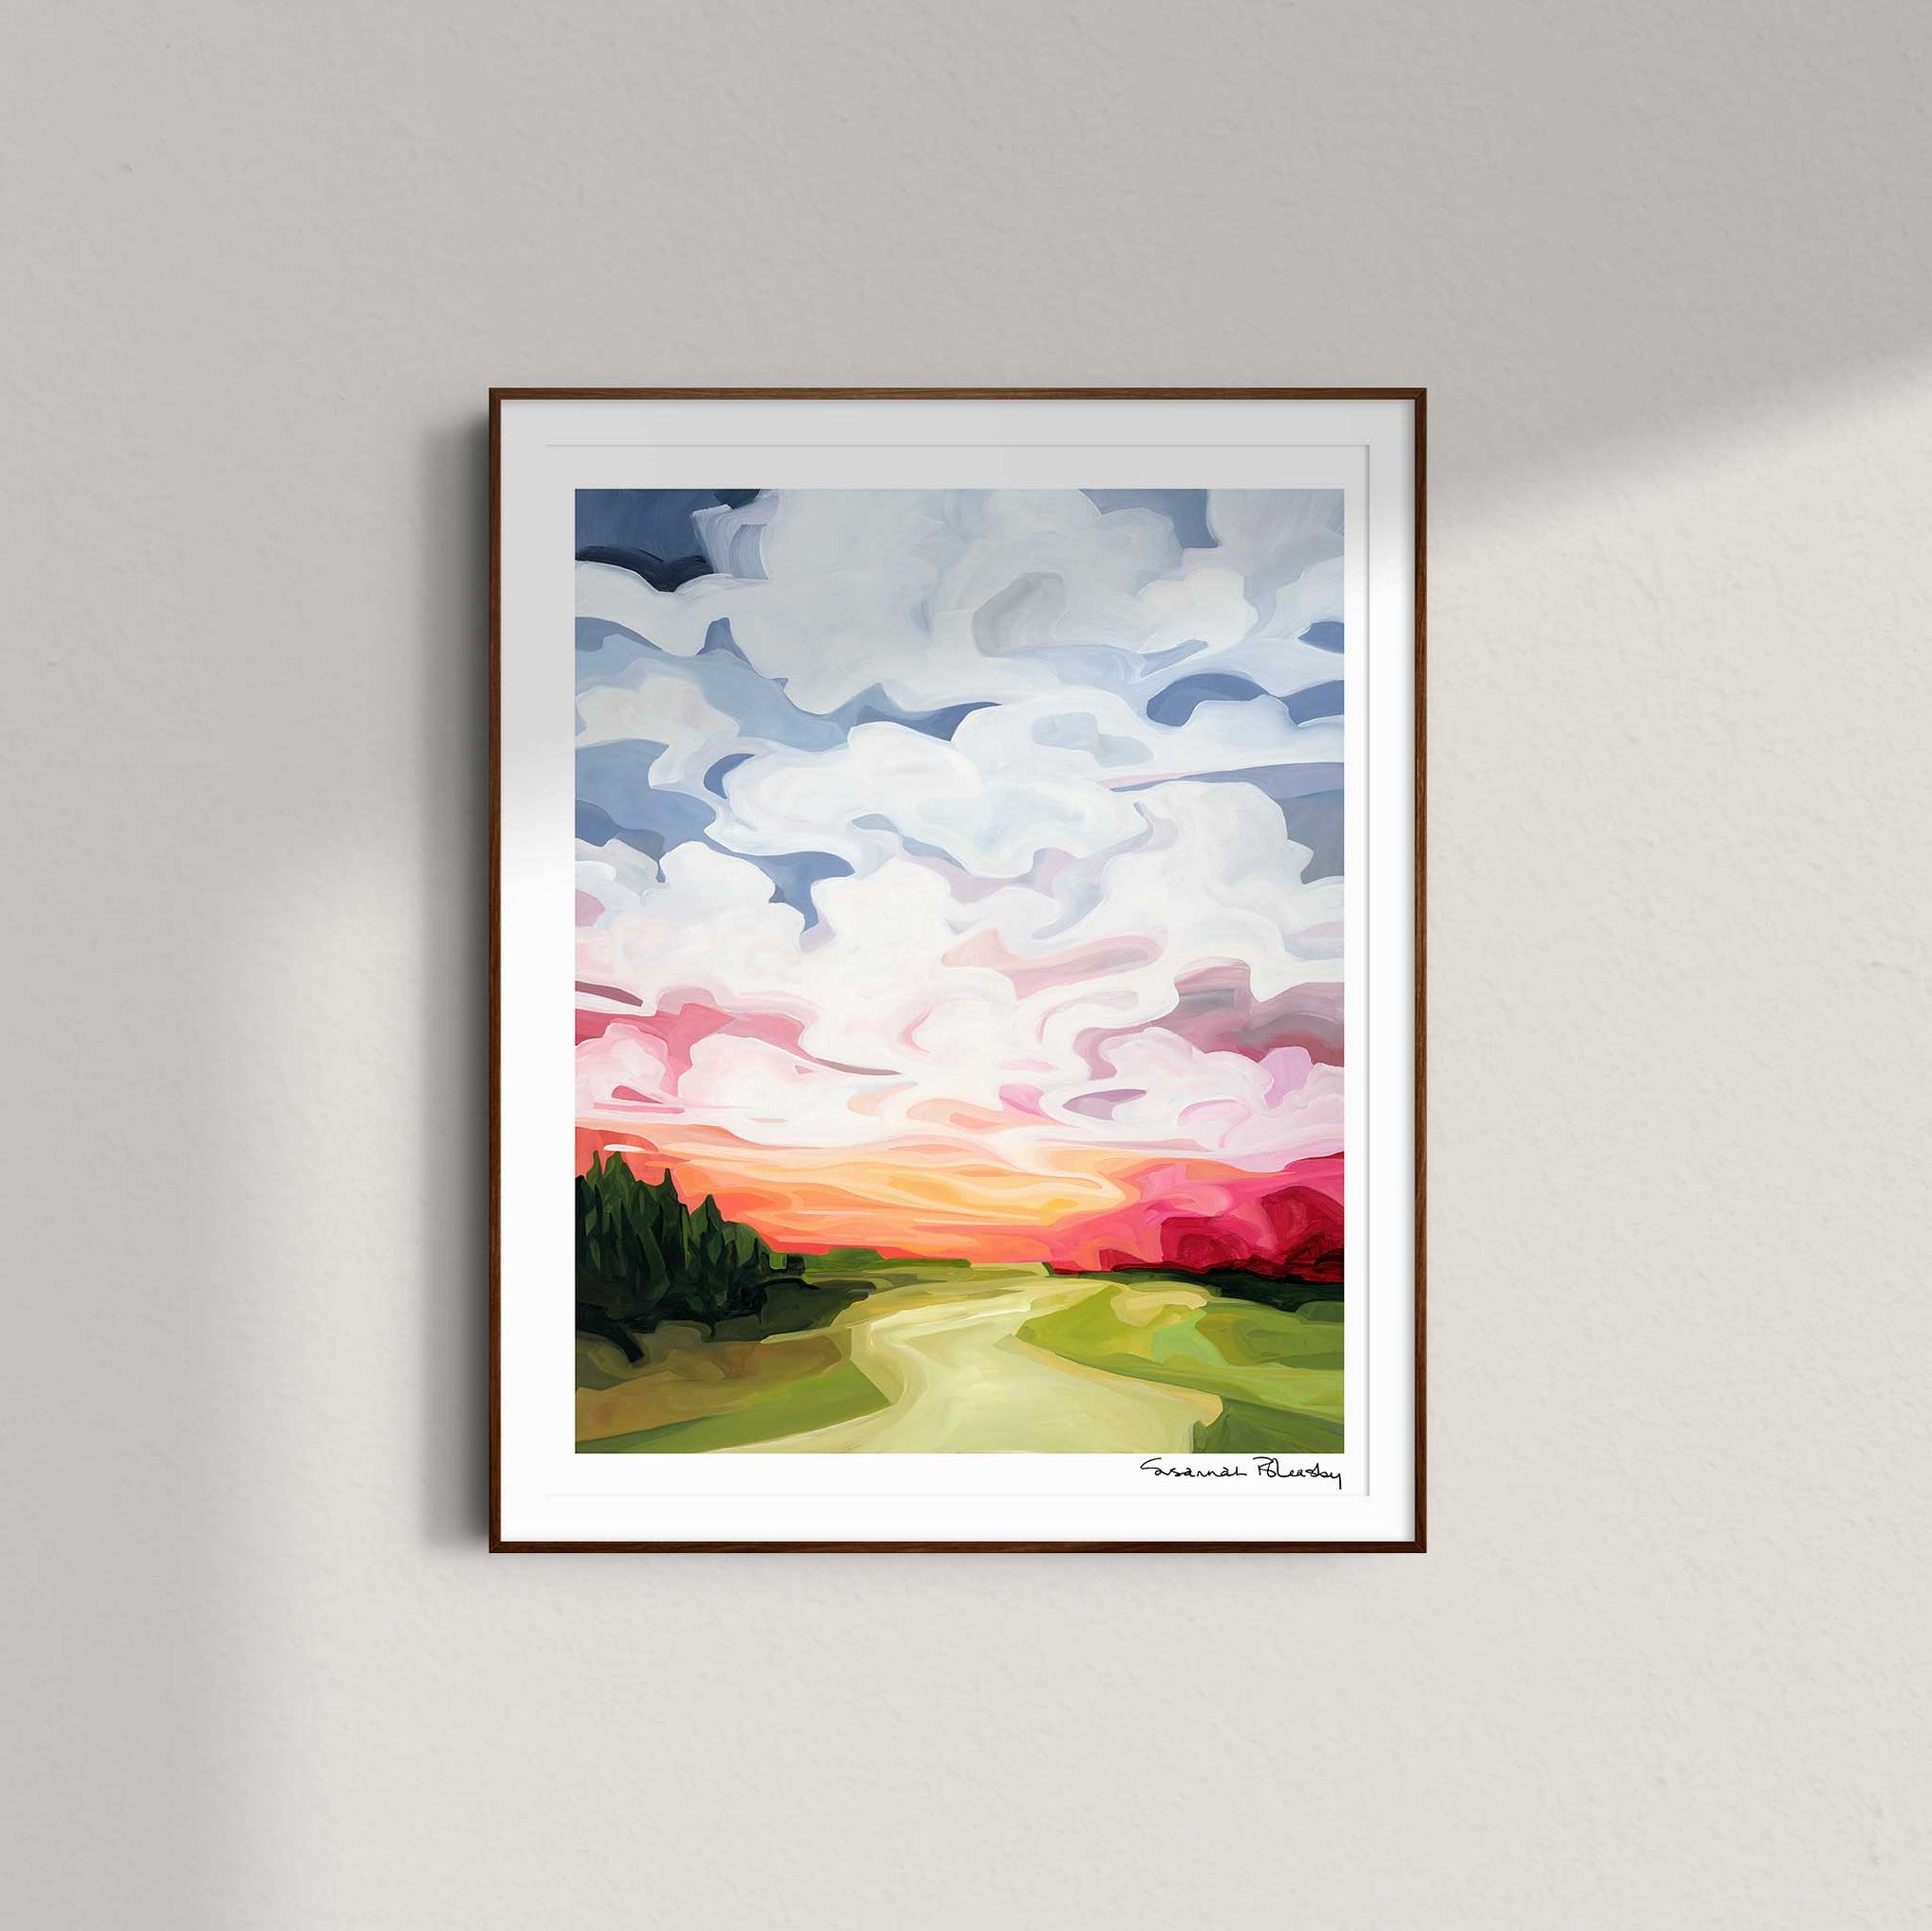 Framed 16x20 vertical art print of a vibrant sunrise painting by Canadian artist Susannah Bleasby